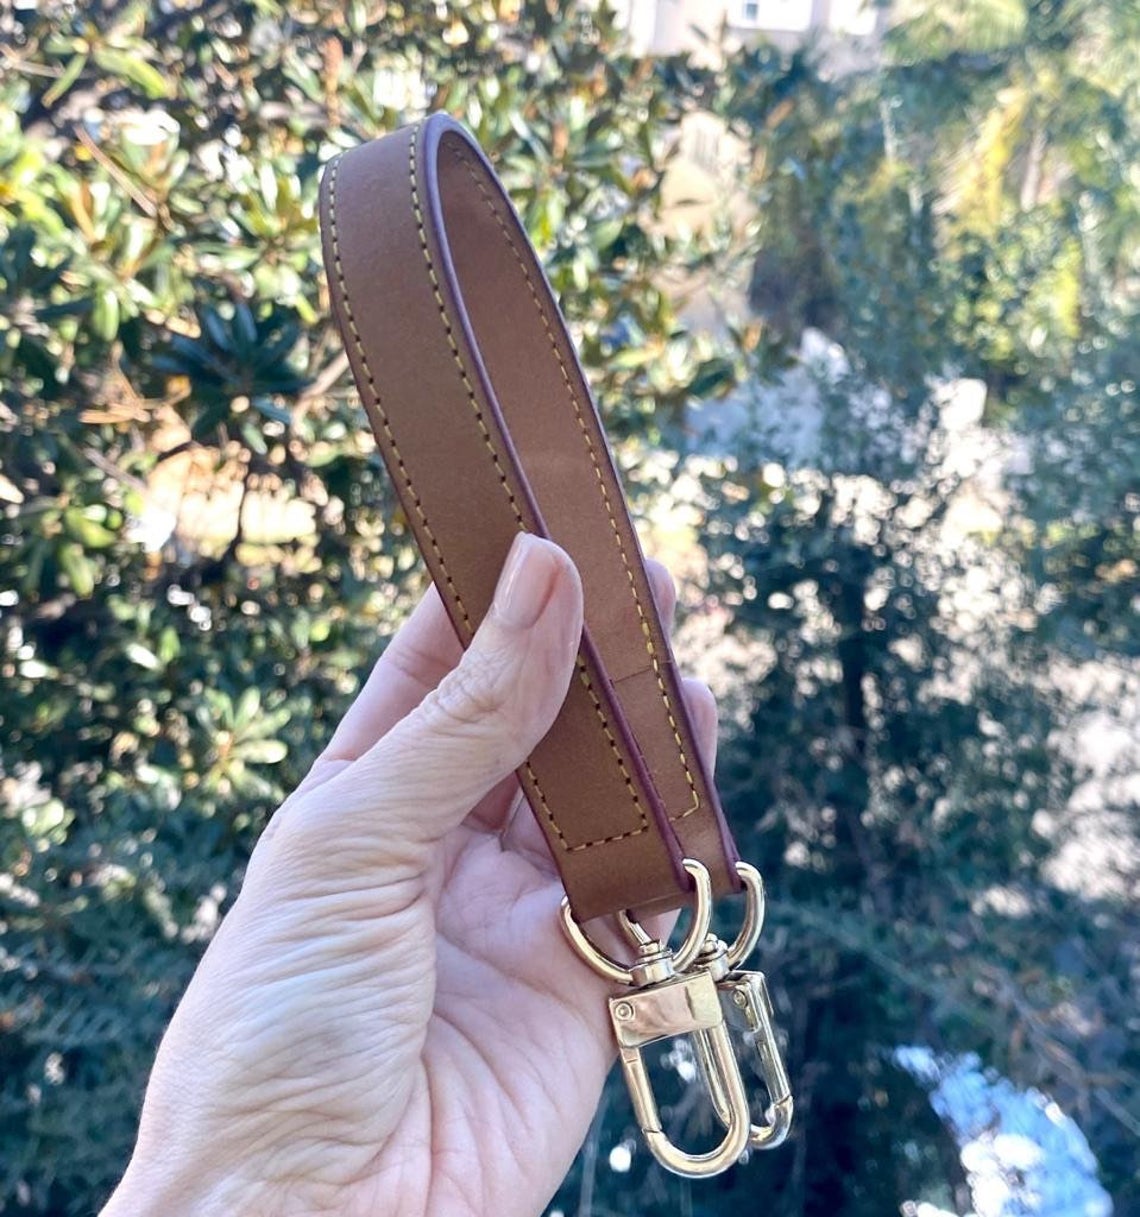 Vachetta Leather Top Handle Purse Strap- Real Vegetable Leather - Honey Tanning Handmade Patina - Perfect for Bucket Vintage Bags 3/4”wide - Sexy Little Vintage